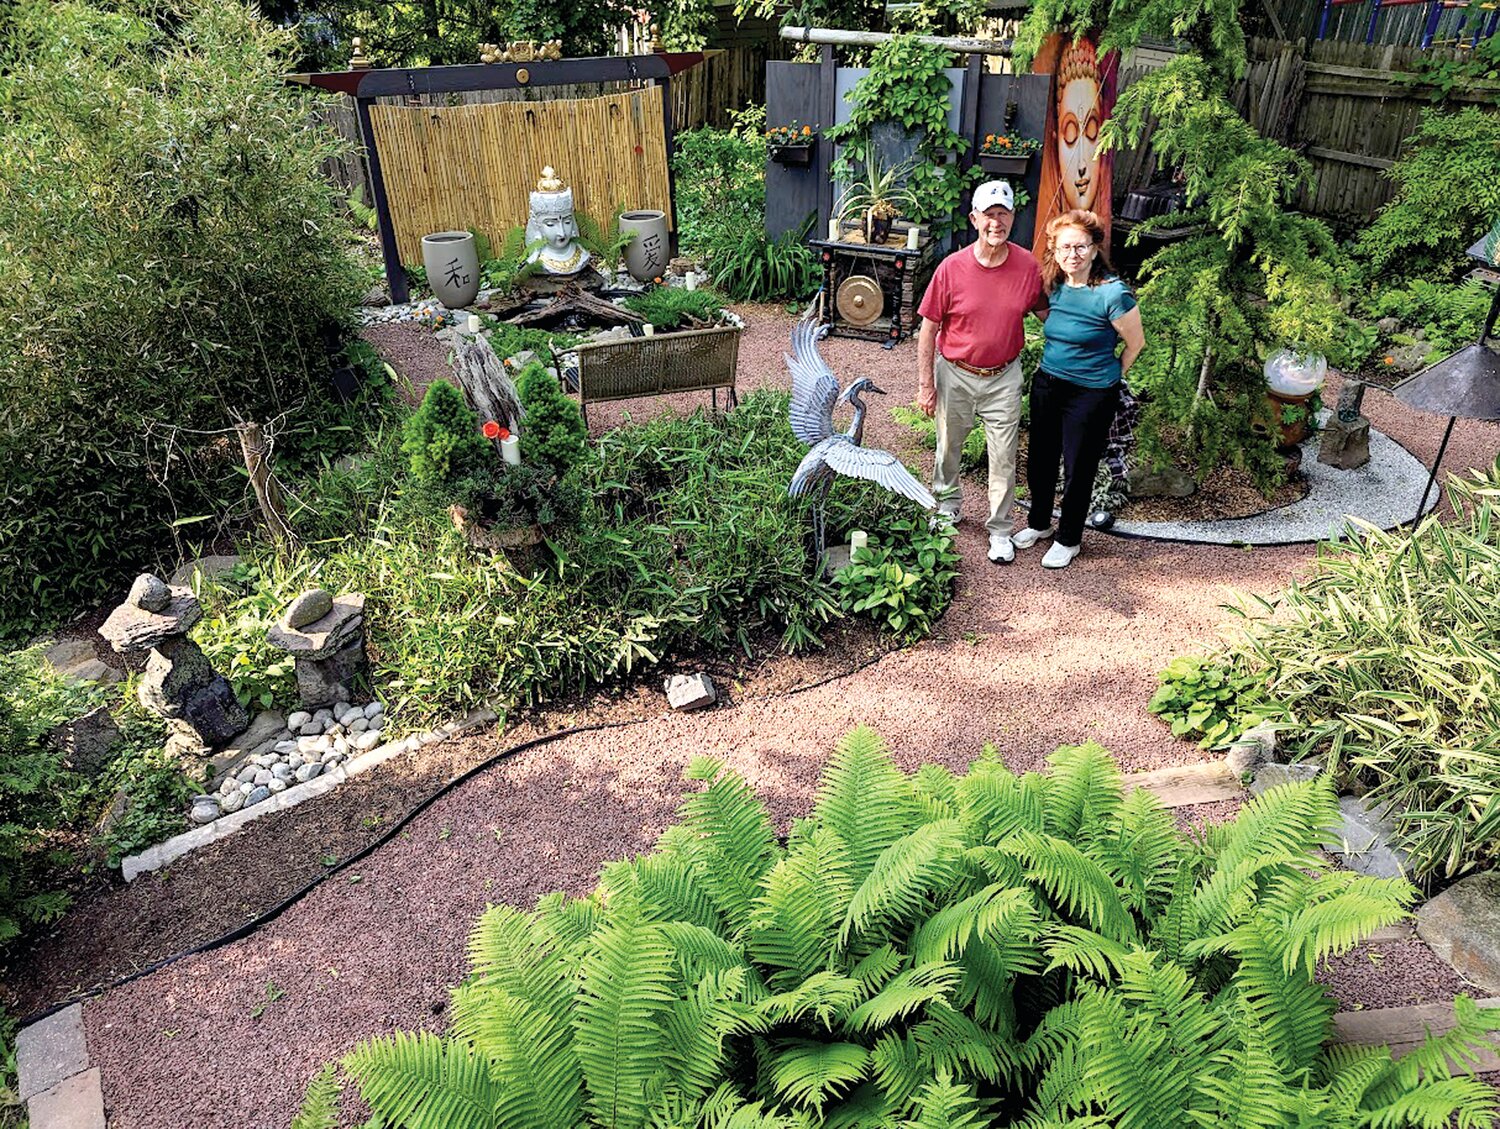 Michael McCullough and Liz Kemly’s Lincoln Avenue property has been made into a Japanese garden.